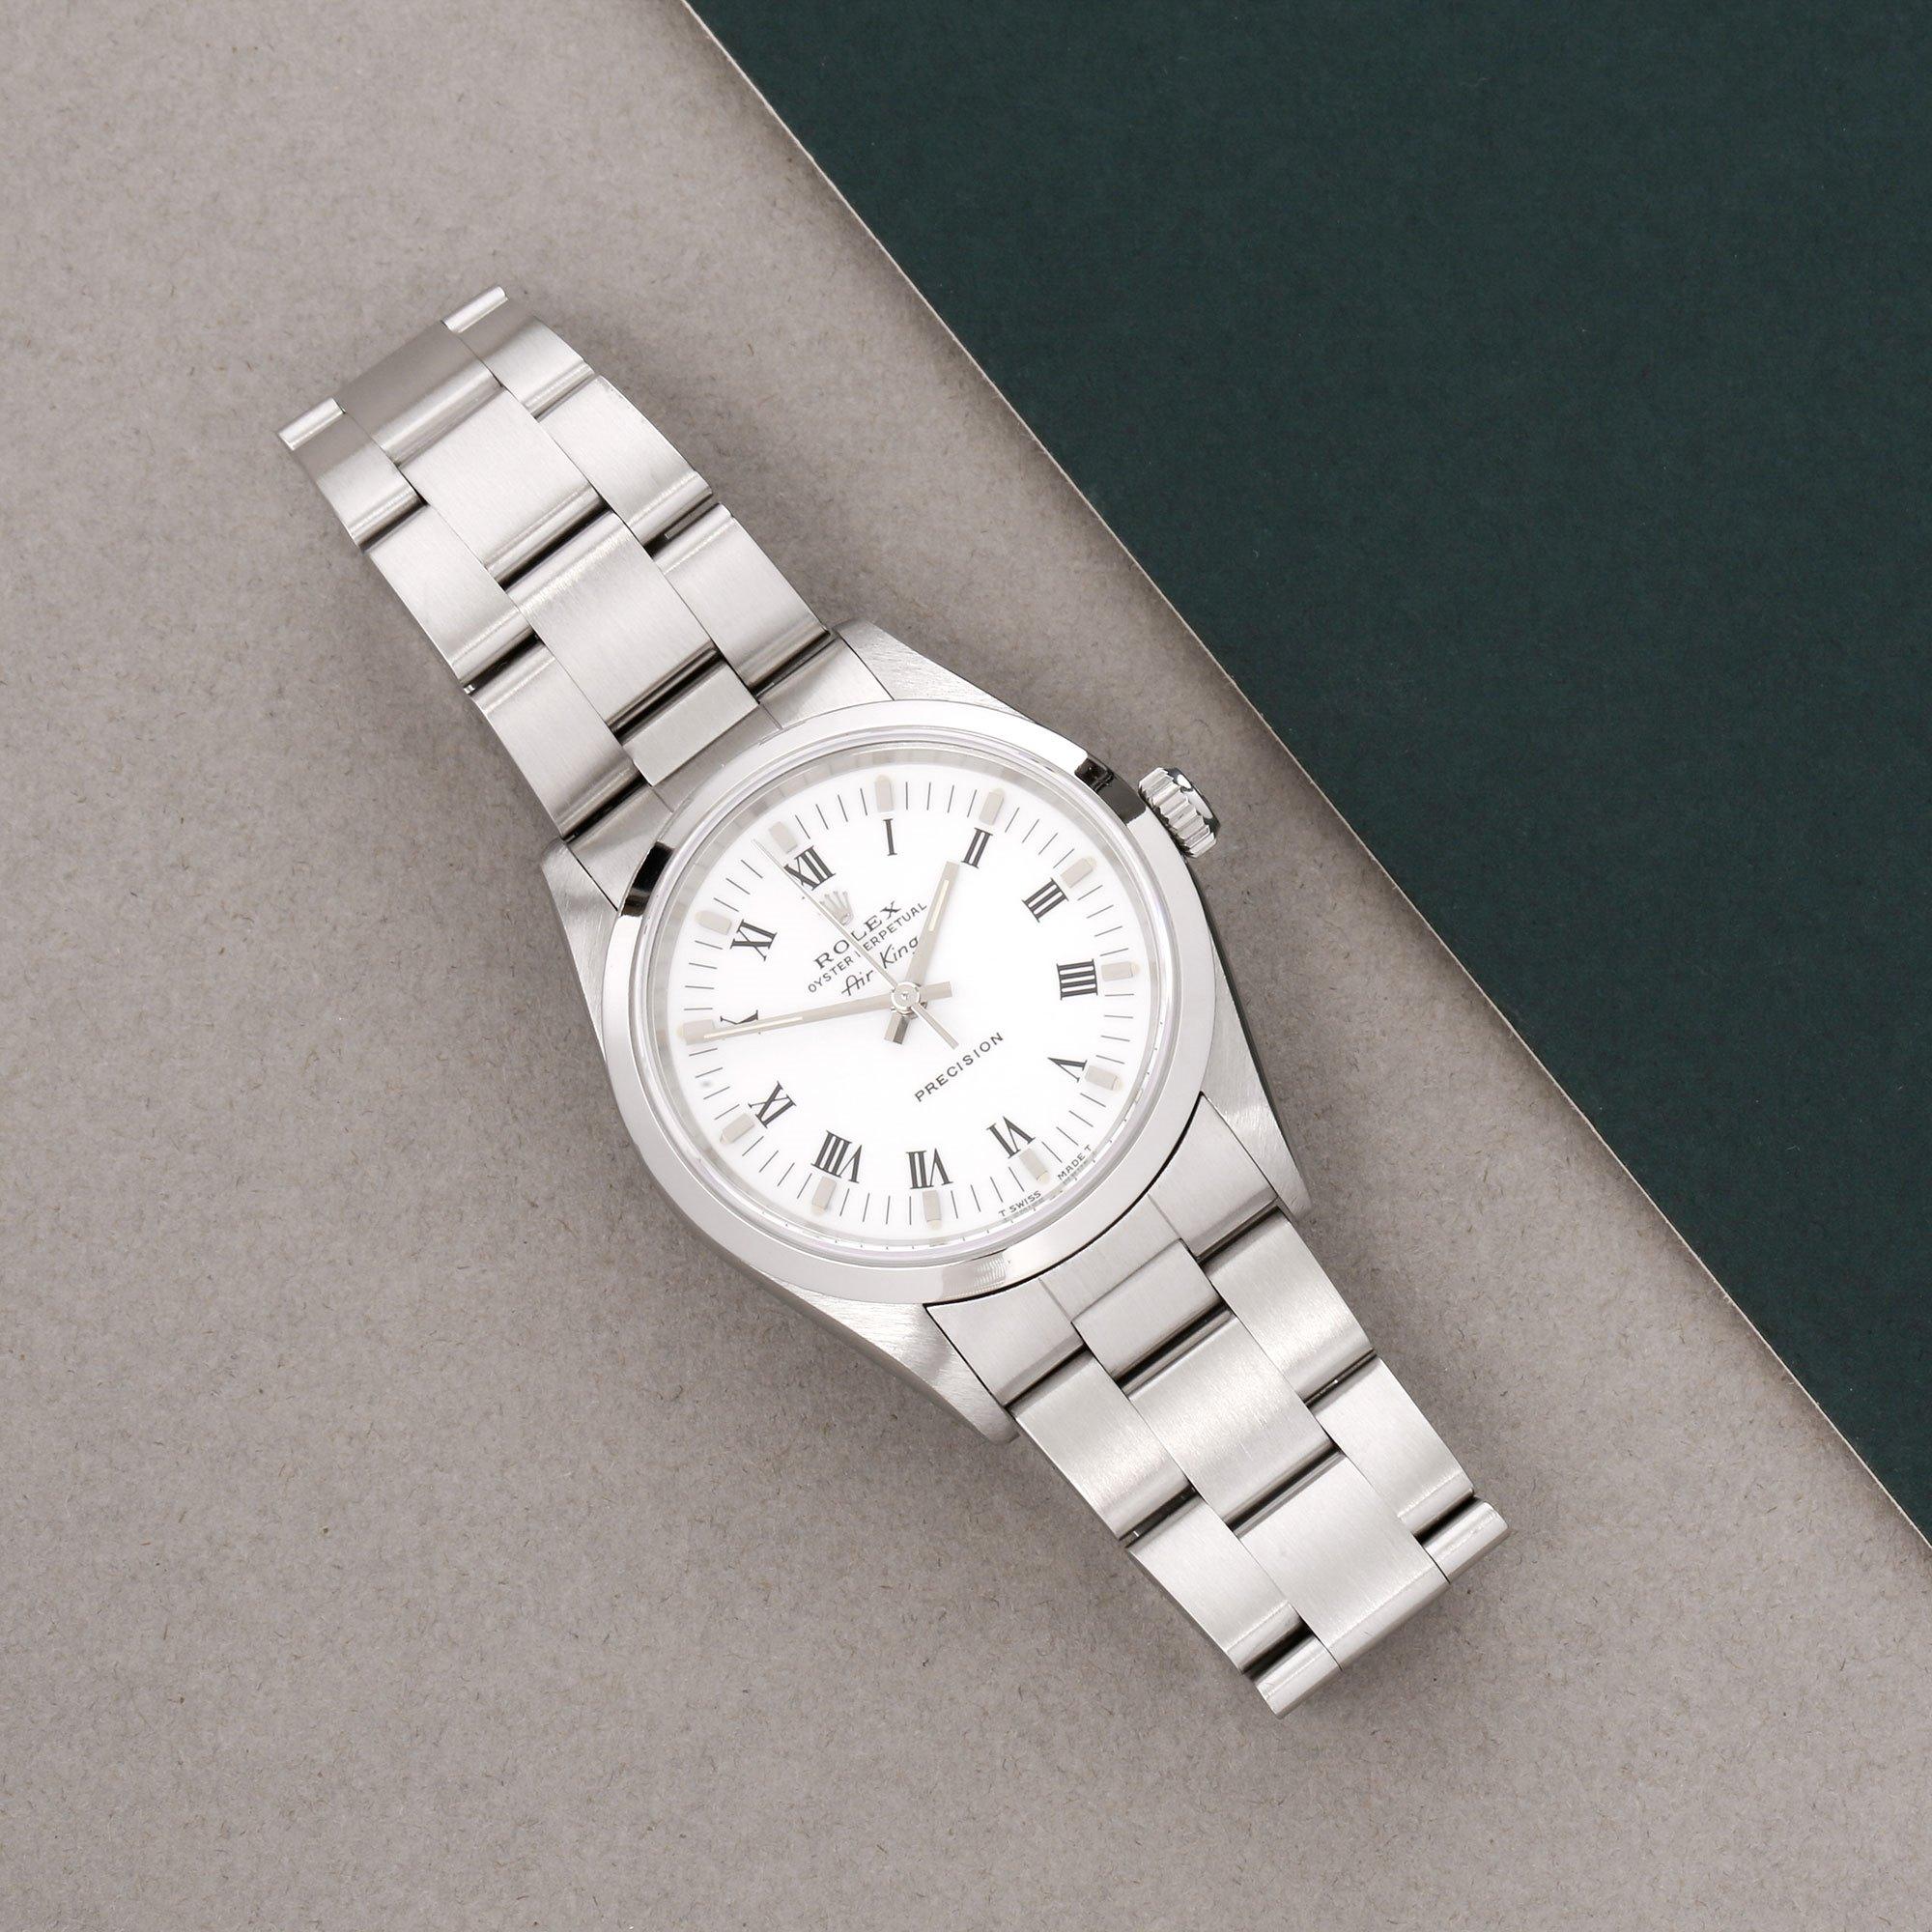 Xupes Reference: W007576
Manufacturer: Rolex
Model: Air-King
Model Variant: 0
Model Number: 14000
Age: 1997
Gender: Men
Complete With: Rolex Service Pouch 
Dial: Silver Baton
Glass: Sapphire Crystal
Case Size: 34mm
Case Material: Stainless